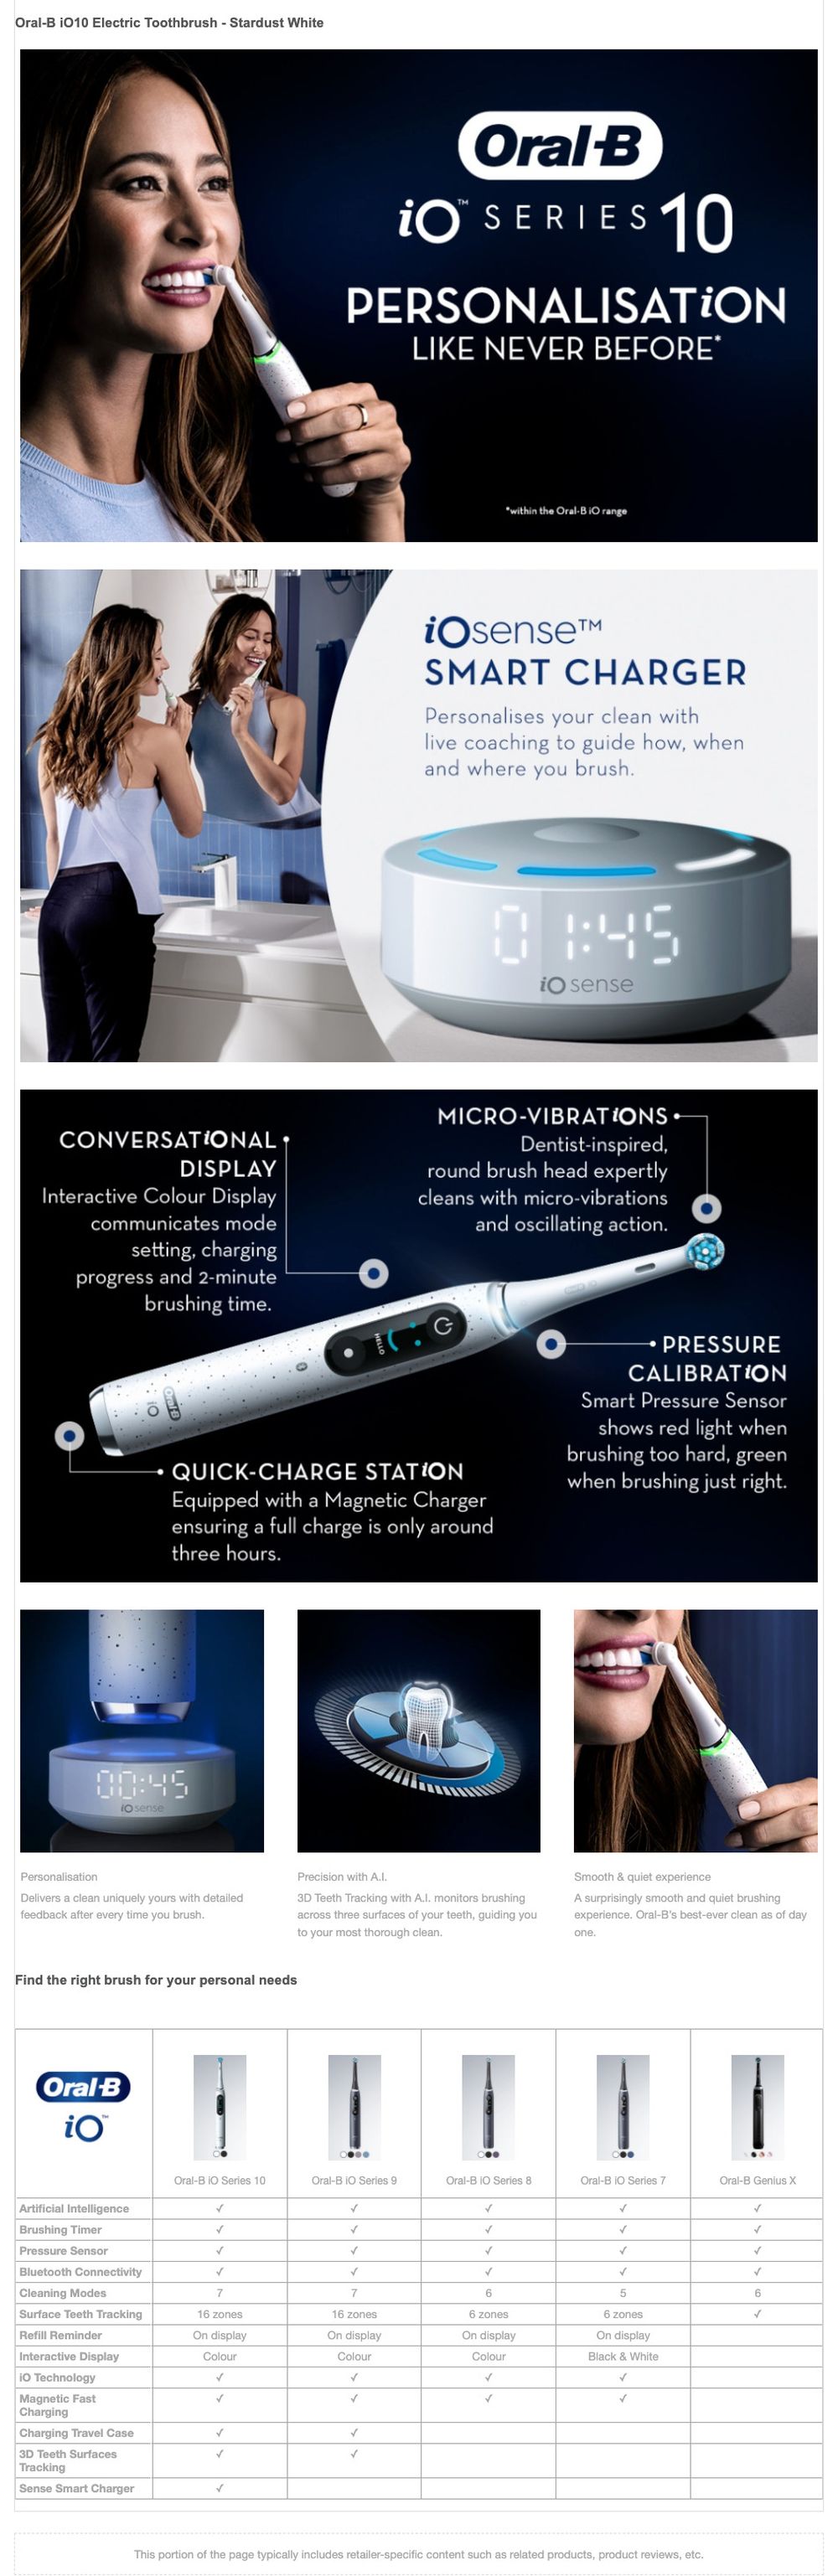 Oral-B 1010 Electric Toothbrush - Stardust White
                                  Oral B FOR SERIES 10 PERSONALISATION
                                  LIKE NEVER BEFORE
                                  within the Oral-B 10 range
                                  iOsenset SMART CHARGER Personalises your clean with live coaching to guide how, when and where you brush.
                                  io sense
                                  CONVERSATIONAL
                                  DISPLAY Interactive Colour Display communicates mode
                                  setting, charging progress and 2-minute
                                  brushing time.
                                  MICRO-VIBRATIONS
                                  Dentist-inspired round brush head expertly cleans with micro-vibrations
                                  and oscillating action.
                                  PRESSURE
                                  CALIBRATION Smart Pressure Sensor
                                  shows red light when brushing too hard, green when brushing just right.
                                  QUICK-CHARGE STATION Equipped with a Magnetic Charger ensuring a full charge is only around three hours.
                                  O sense
                                  Personalisation Delivers a clean uniquely yours with detailed feedback after every time you brush.
                                  Precision with A.. 3D Teeth Tracking with A.I. monitors brushing across three surfaces of your teeth, guiding you to your most thorough clean.
                                  Smooth & quiet experience A surprisingly smooth and quiet brushing experience. Oral-B's best-ever clean as of day one.
                                  Find the right brush for your personal needs
                                  Oral B
                                  io
                                  IO Technology
                                  Magnetic Fast Charging Charging Travel Case 3D Teeth Surfaces Tracking Sense Smart Charger
                                  This portion of the page typically includes retailer-specific content such as related products, product reviews, etc.